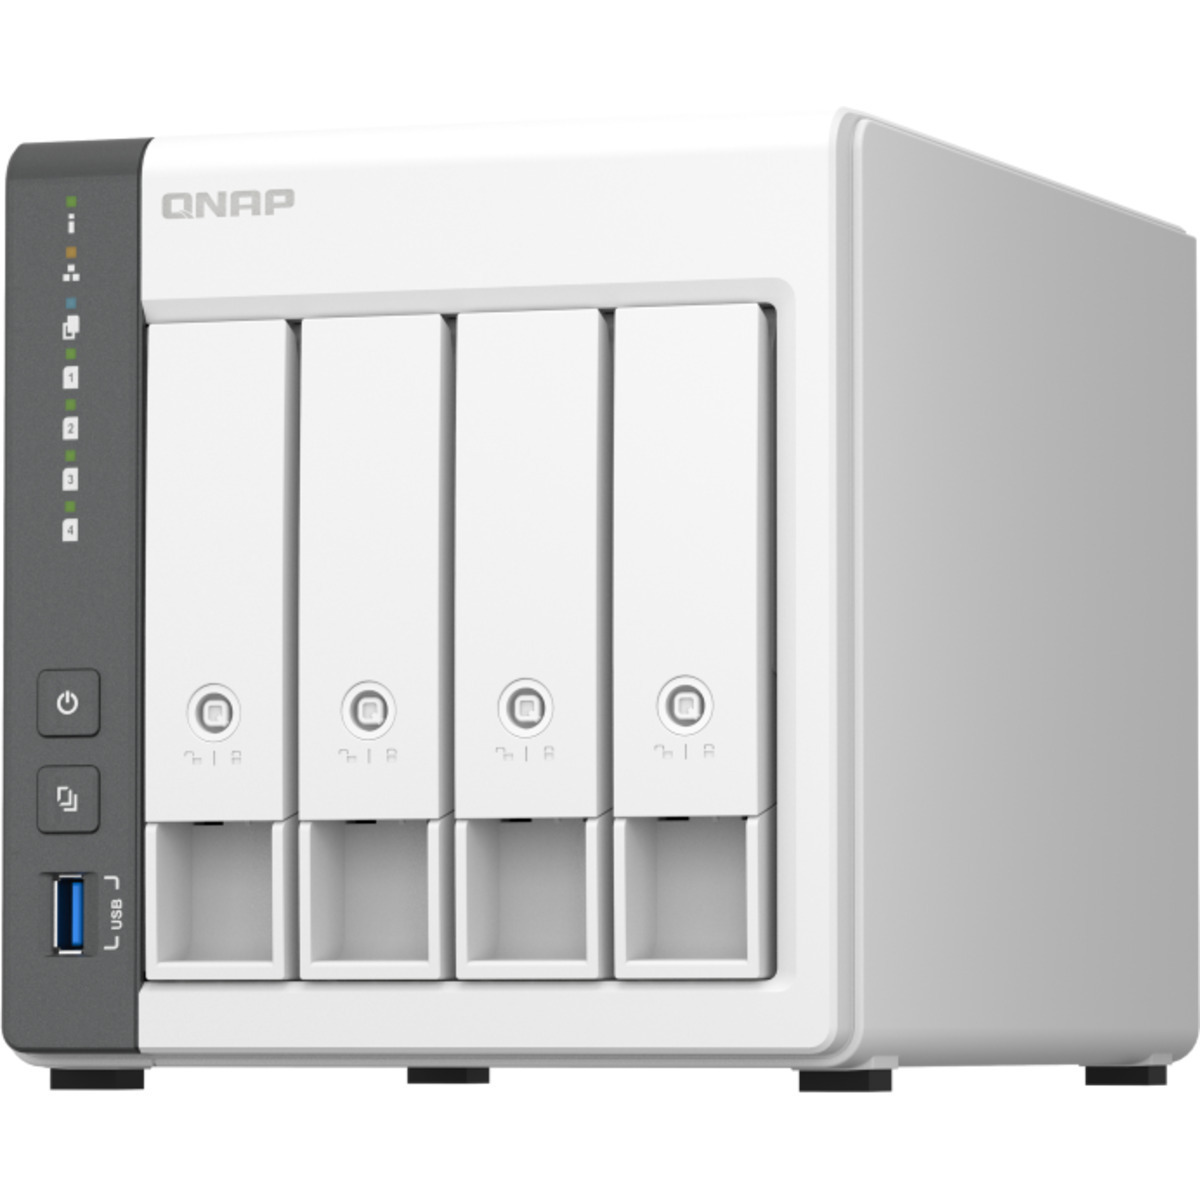 QNAP TS-433 16tb 4-Bay Desktop Personal / Basic Home / Small Office NAS - Network Attached Storage Device 2x8tb Western Digital Gold WD8005FRYZ 3.5 7200rpm SATA 6Gb/s HDD ENTERPRISE Class Drives Installed - Burn-In Tested TS-433